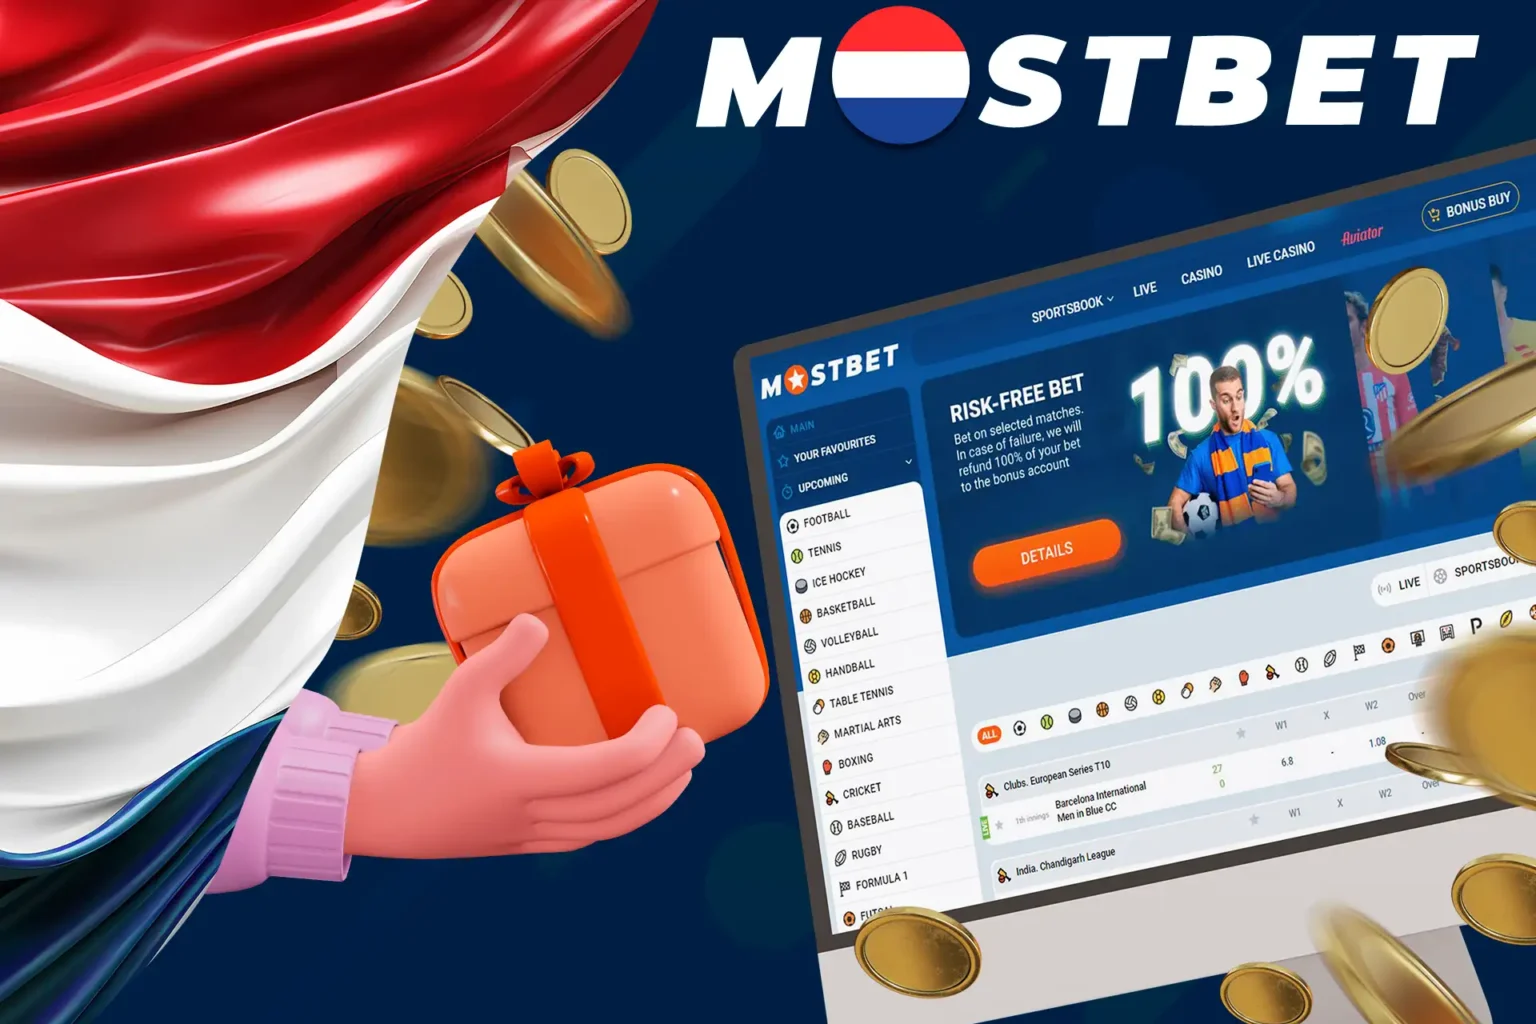 Fascinating Mostbet bookmaker and online casino in Sri Lanka Tactics That Can Help Your Business Grow